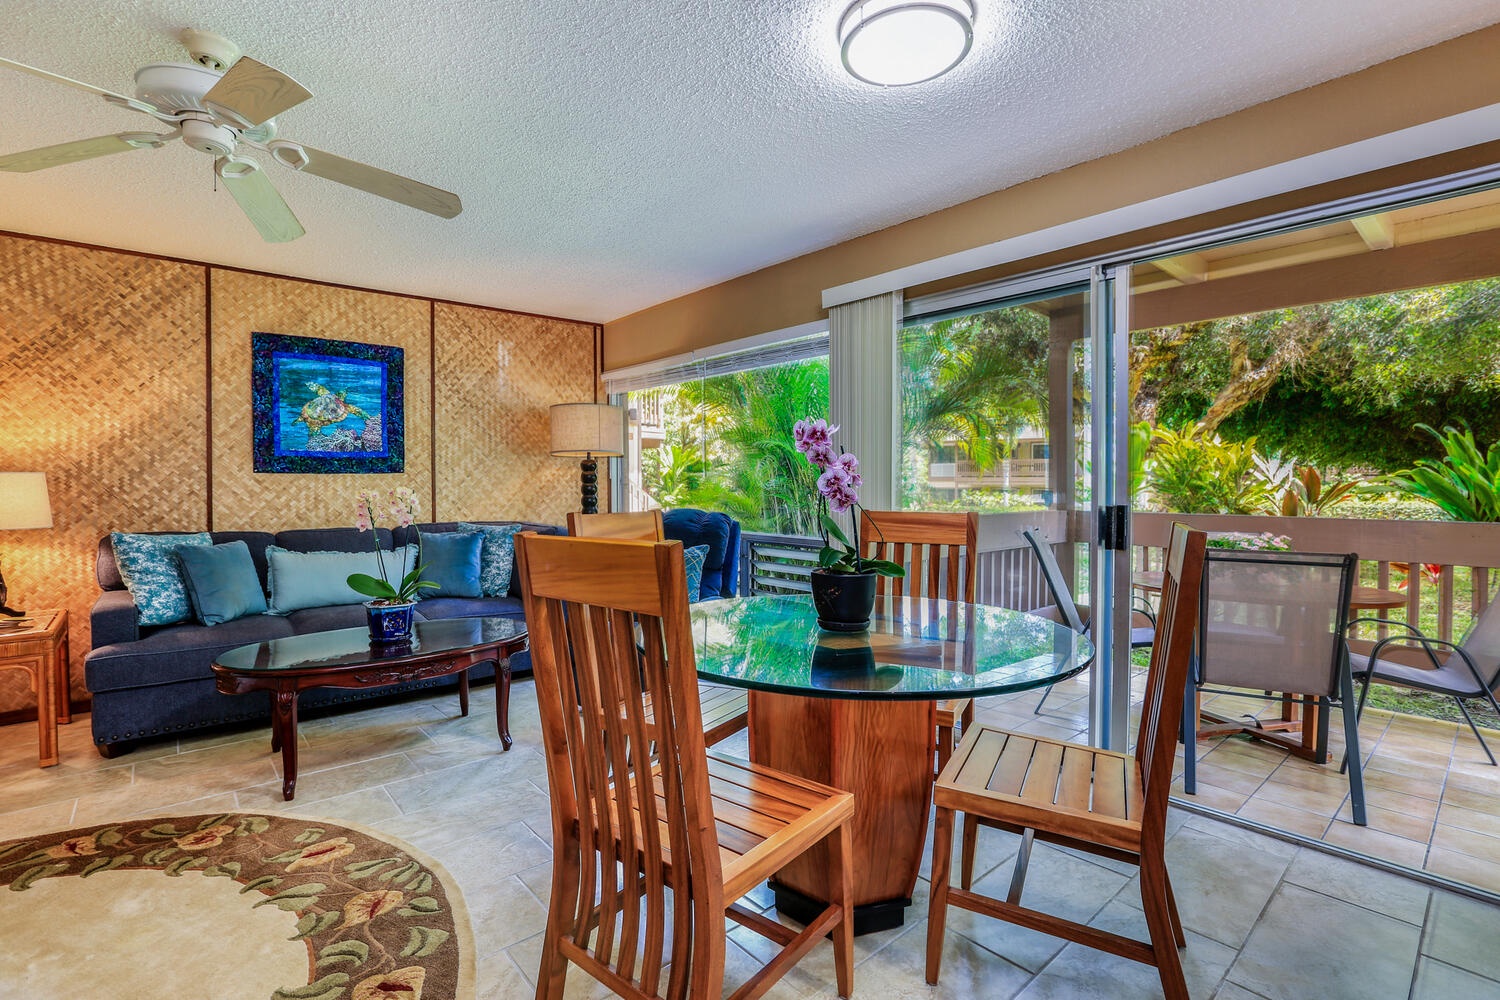 Princeville Vacation Rentals, Hideaway Haven - Experience seamless connection and bond with loved ones in our open-concept floorplan.